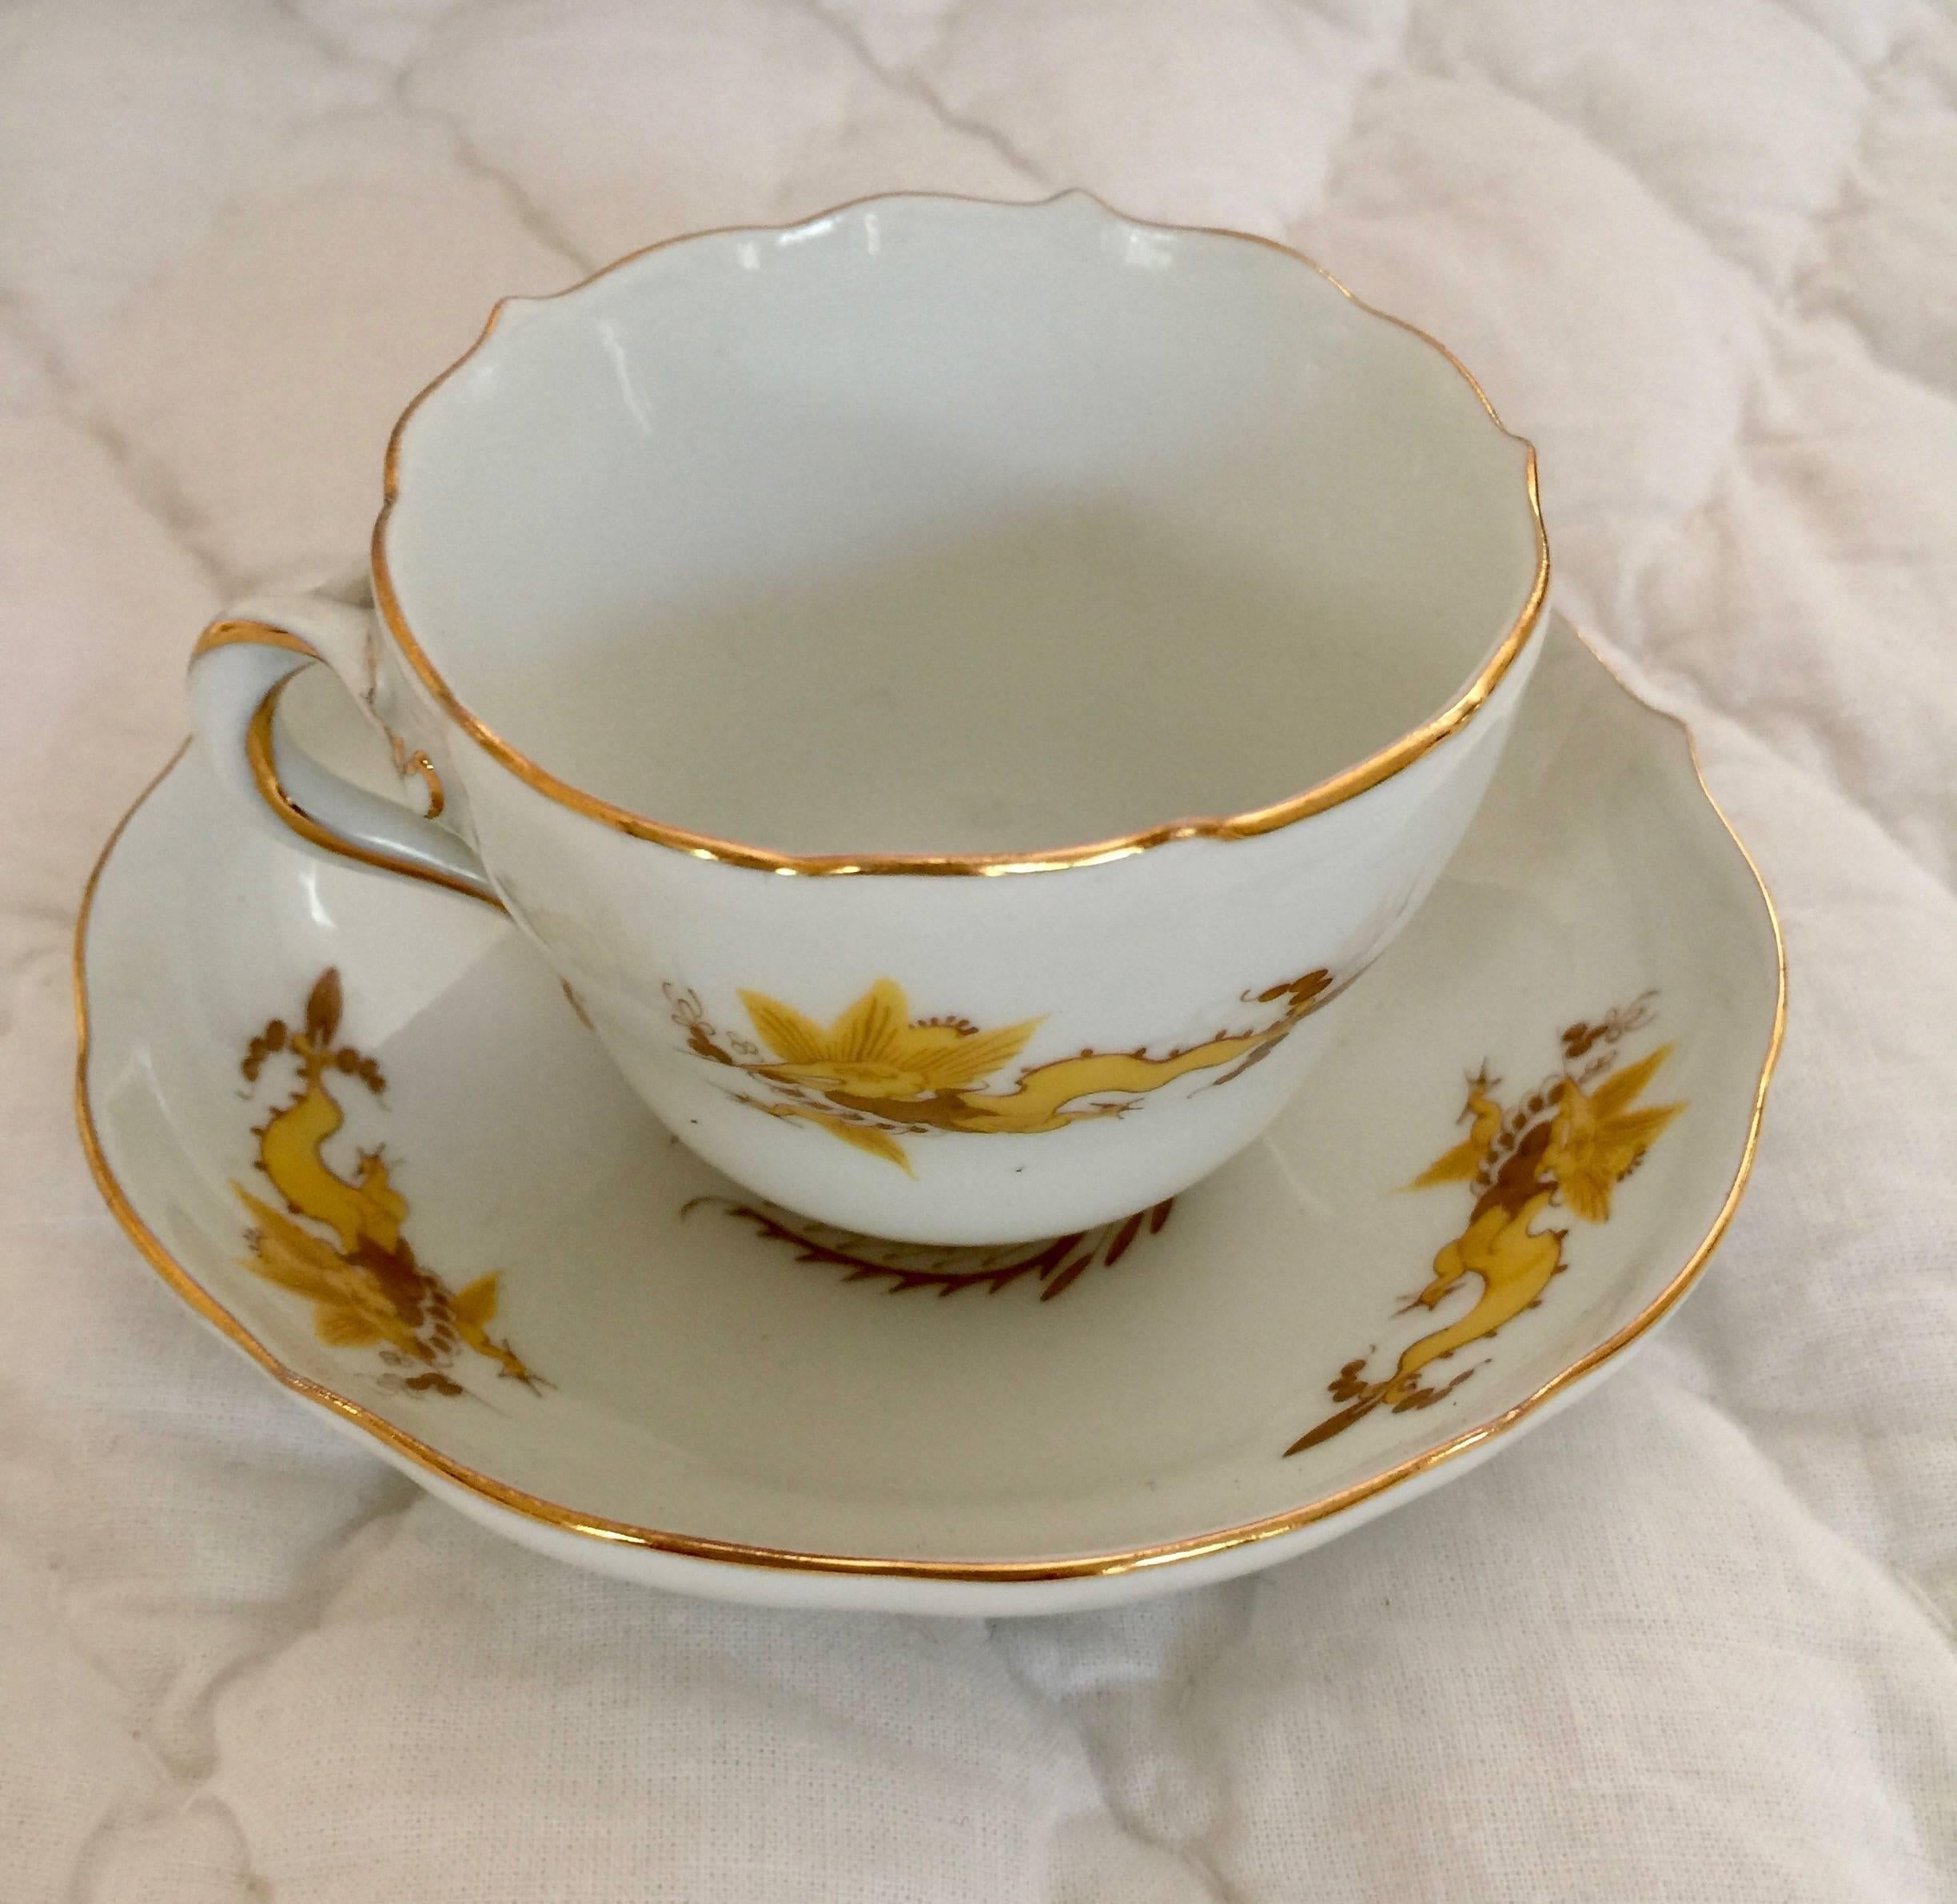 19th century Meissen Porcelain scalloped yellow dragon demitasse cup and saucer
Painted with gold gild and dragons
Saucer 4.13